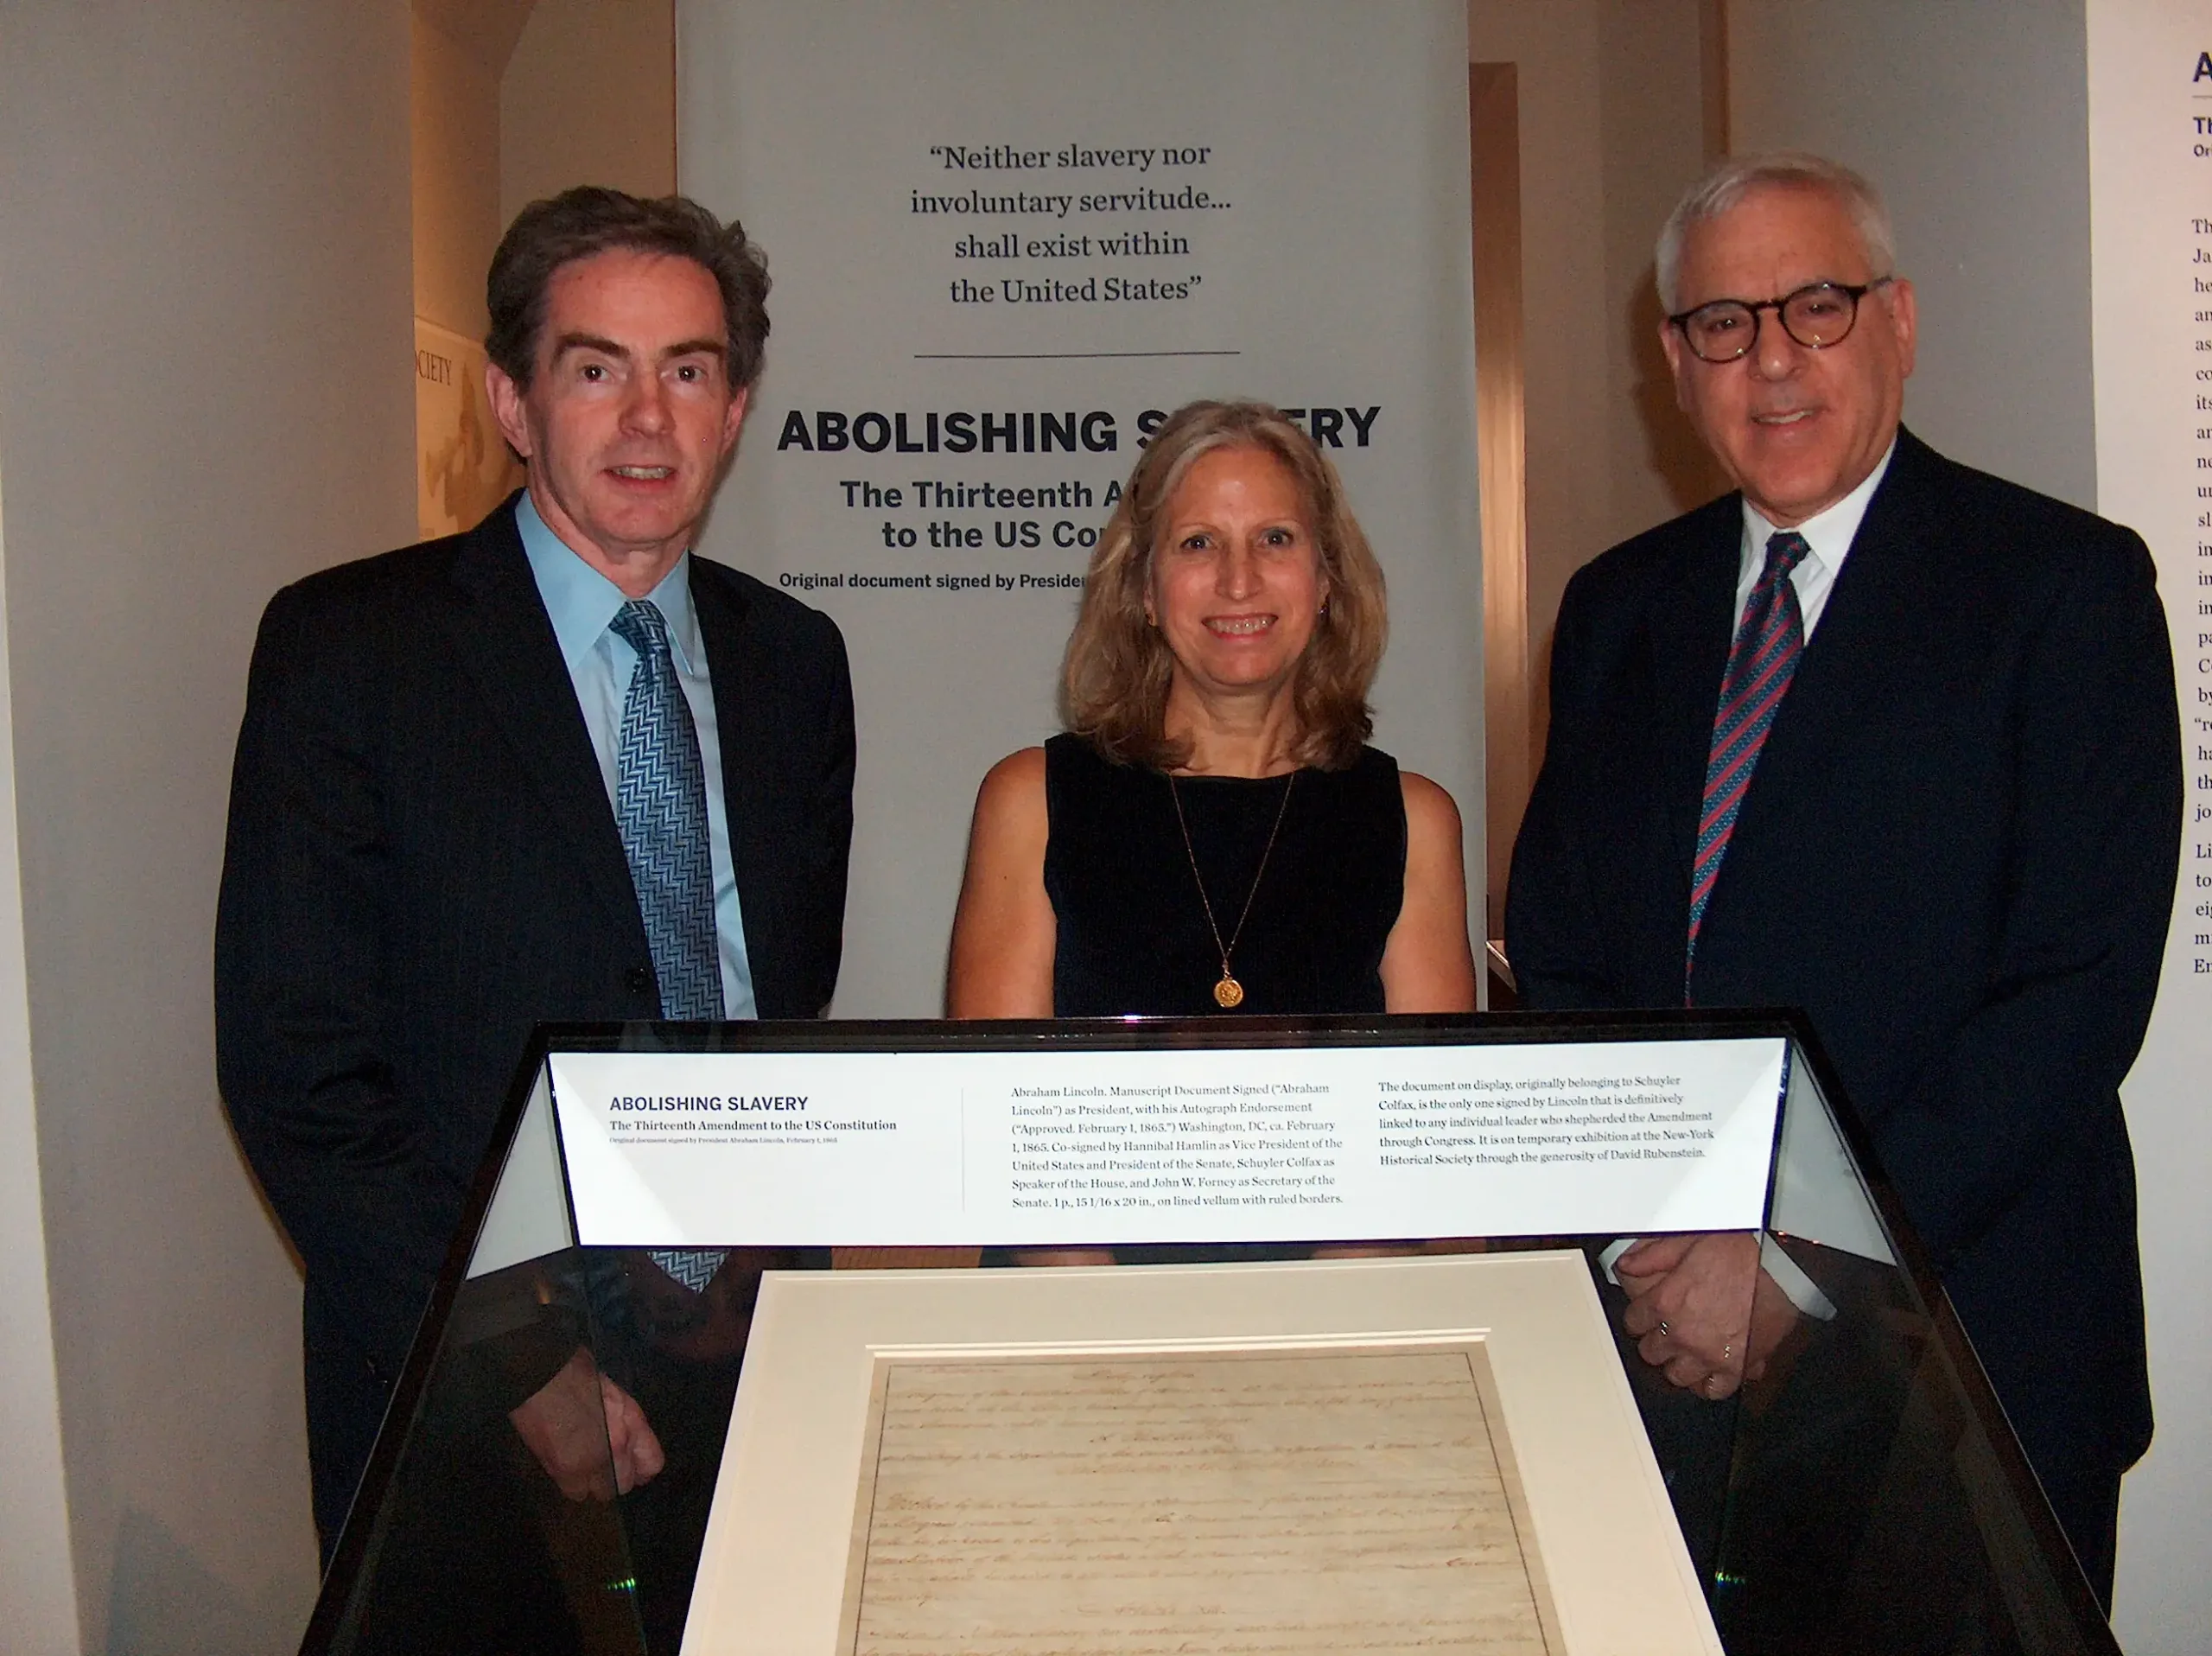 The New-York Historical Society unveiled a rare handwritten copy of the Thirteenth Amendment to the Constitution signed by Abraham Lincoln.